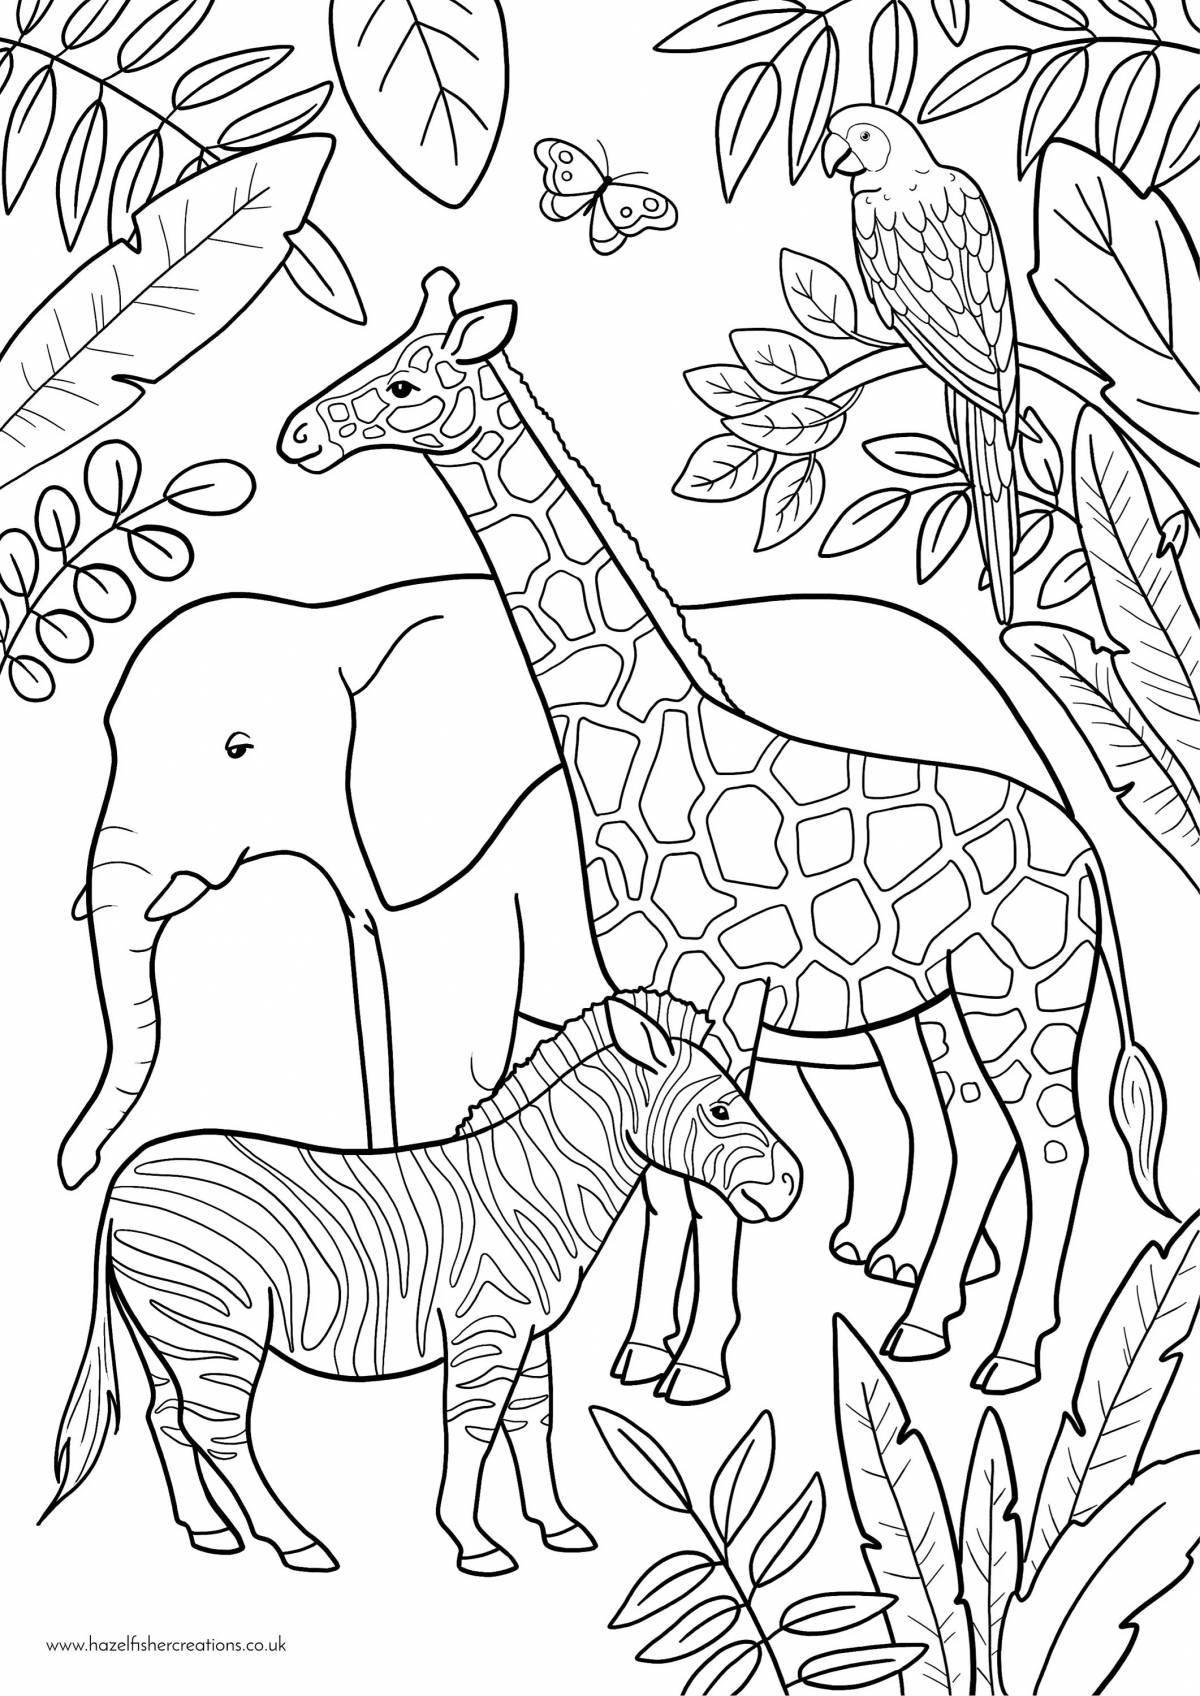 Incredible African Animal Coloring Book for 3-4 year olds